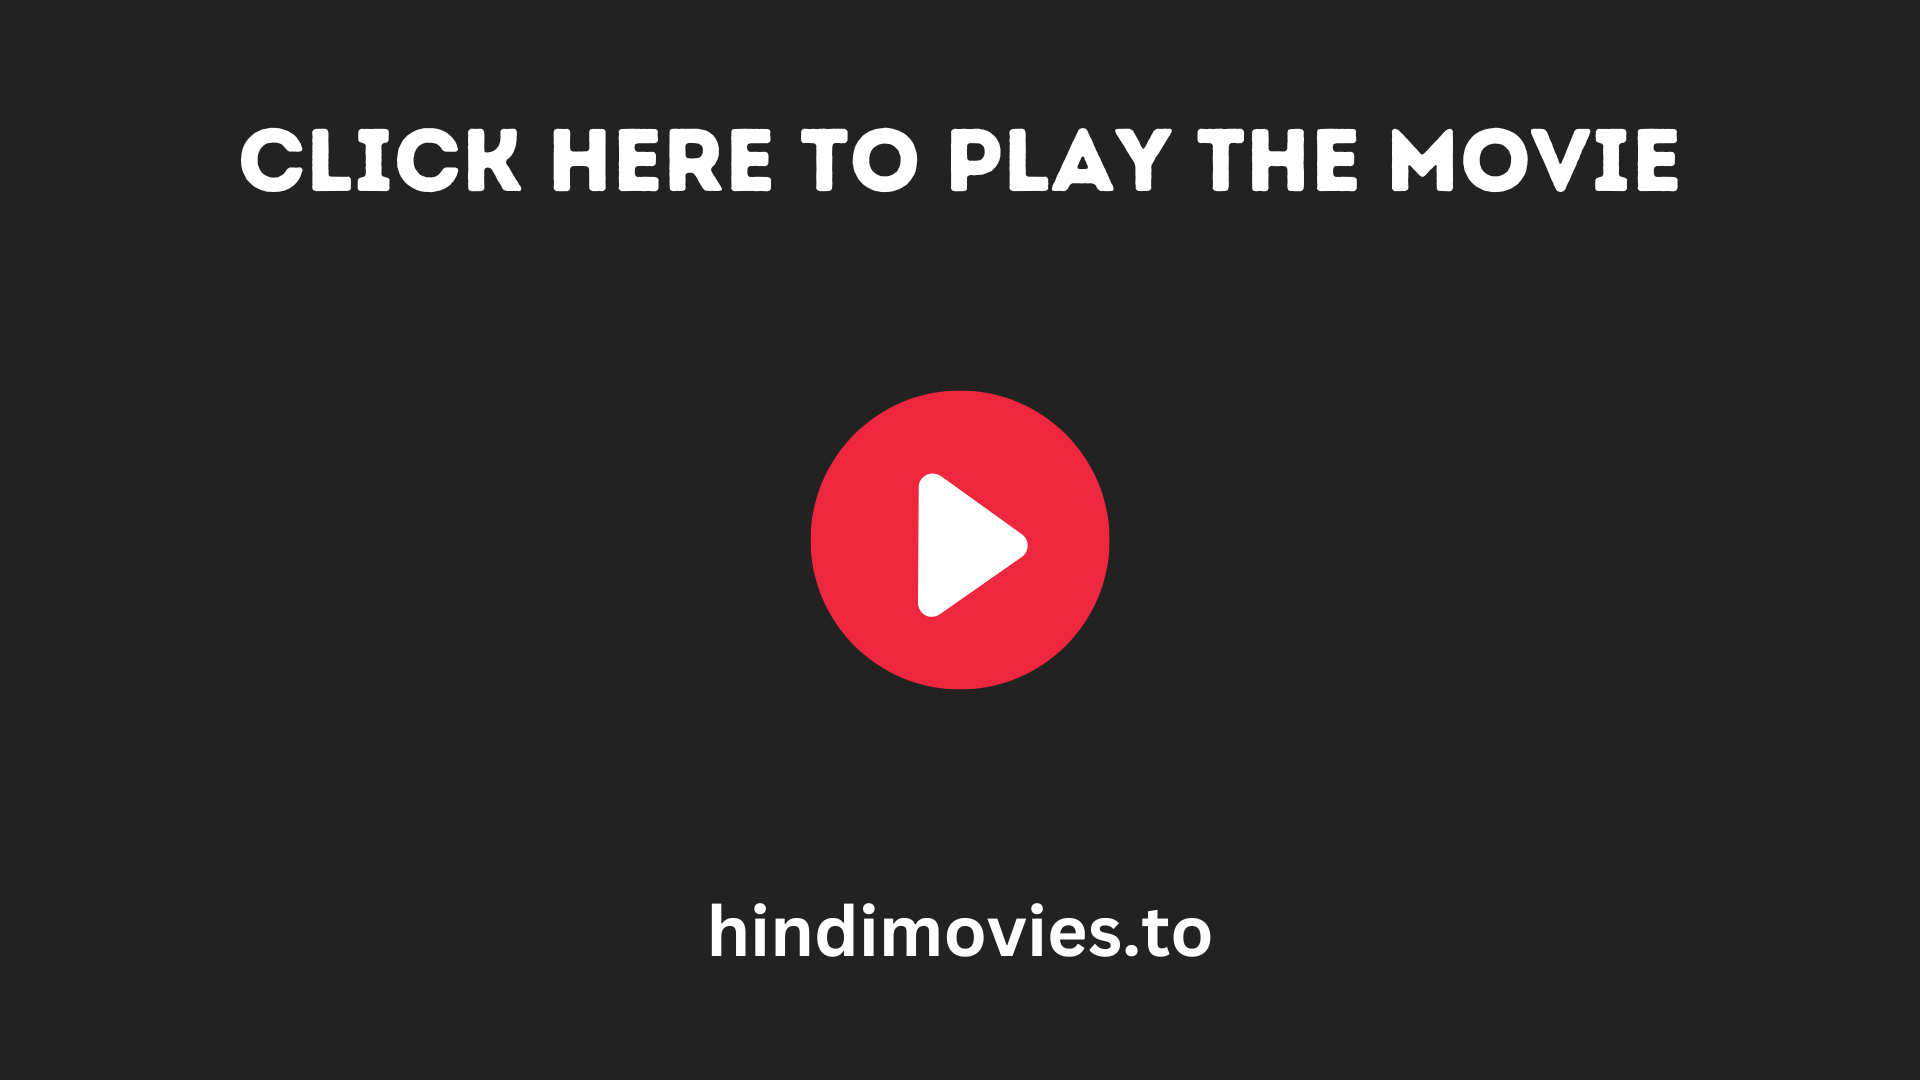 Click here to play the movie